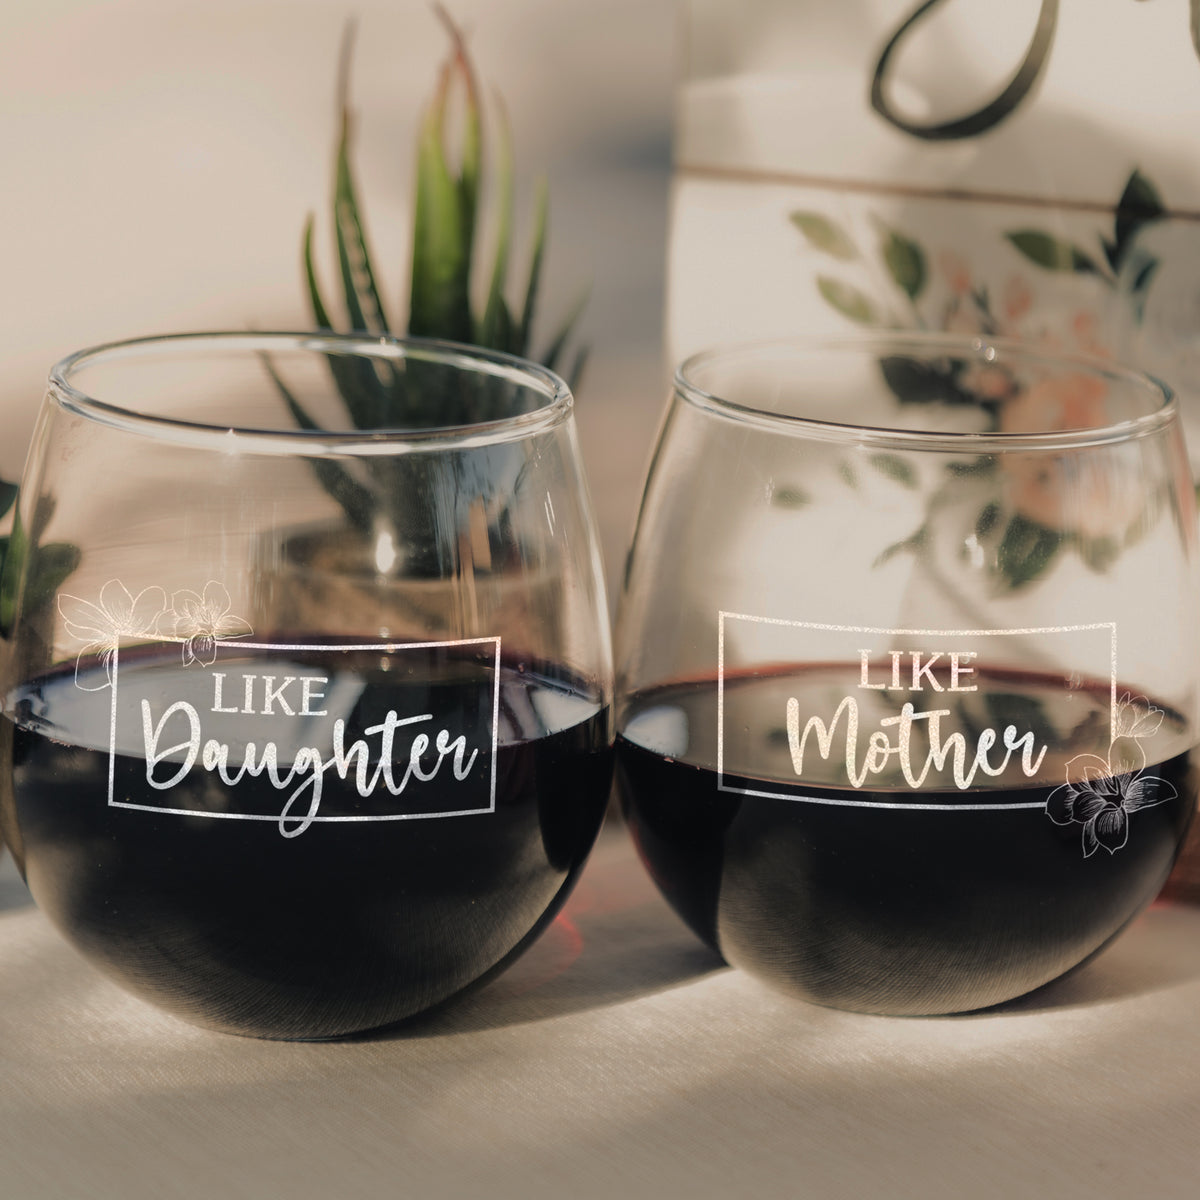 Bezrat Mr and Mrs Stemless Wine Glasses - Set Of 2-16 Ounces - Gift fo